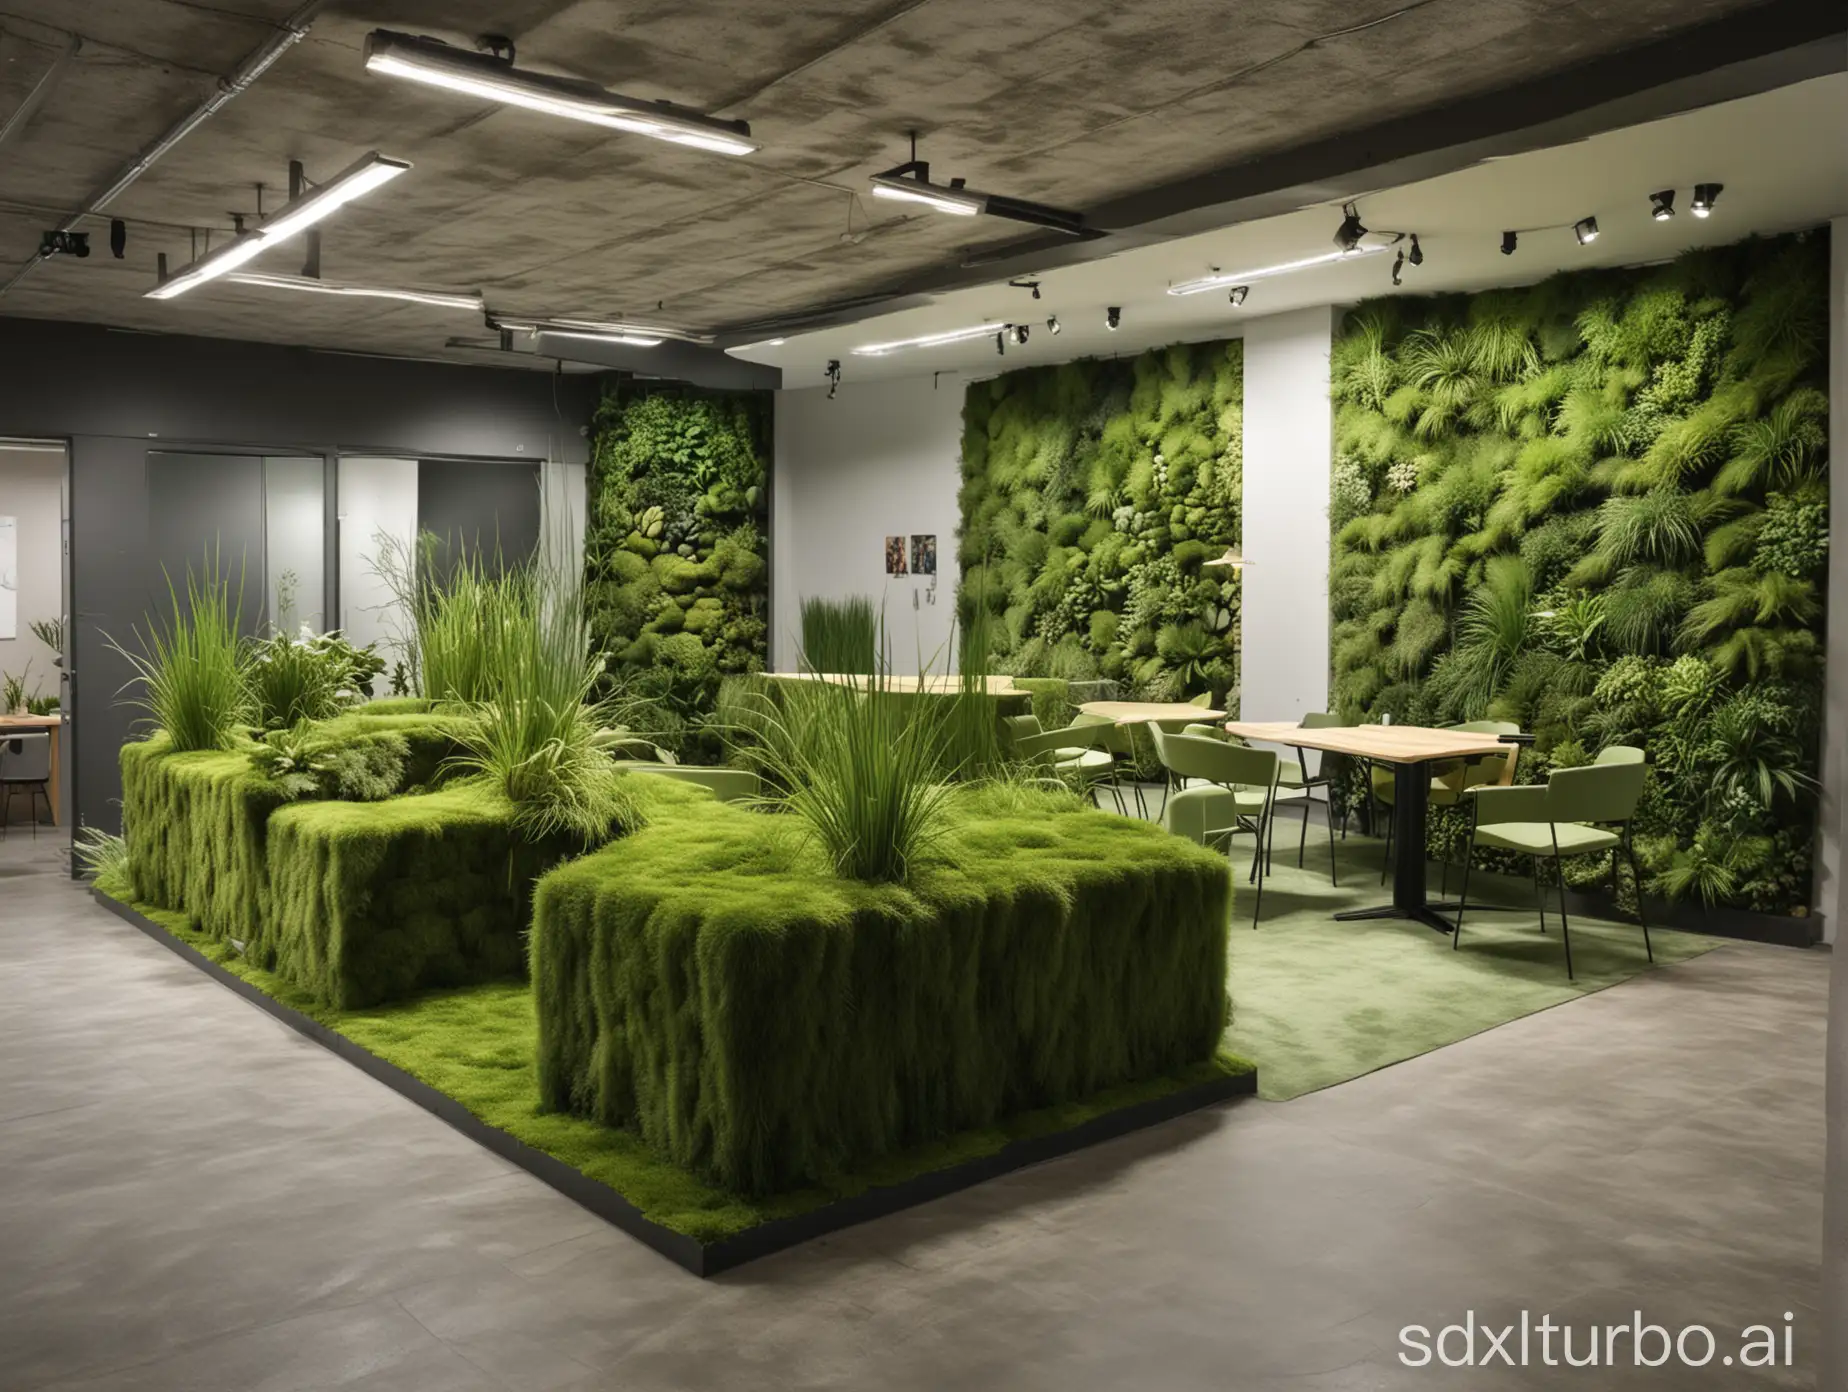 office for landscape design studio. medium-sized, bright, in green tones. various design elements in the form of grass, moss. separate waiting zone, separate place for designer and clients, reception at the entrance. there is a stand with sample projects of landscape design